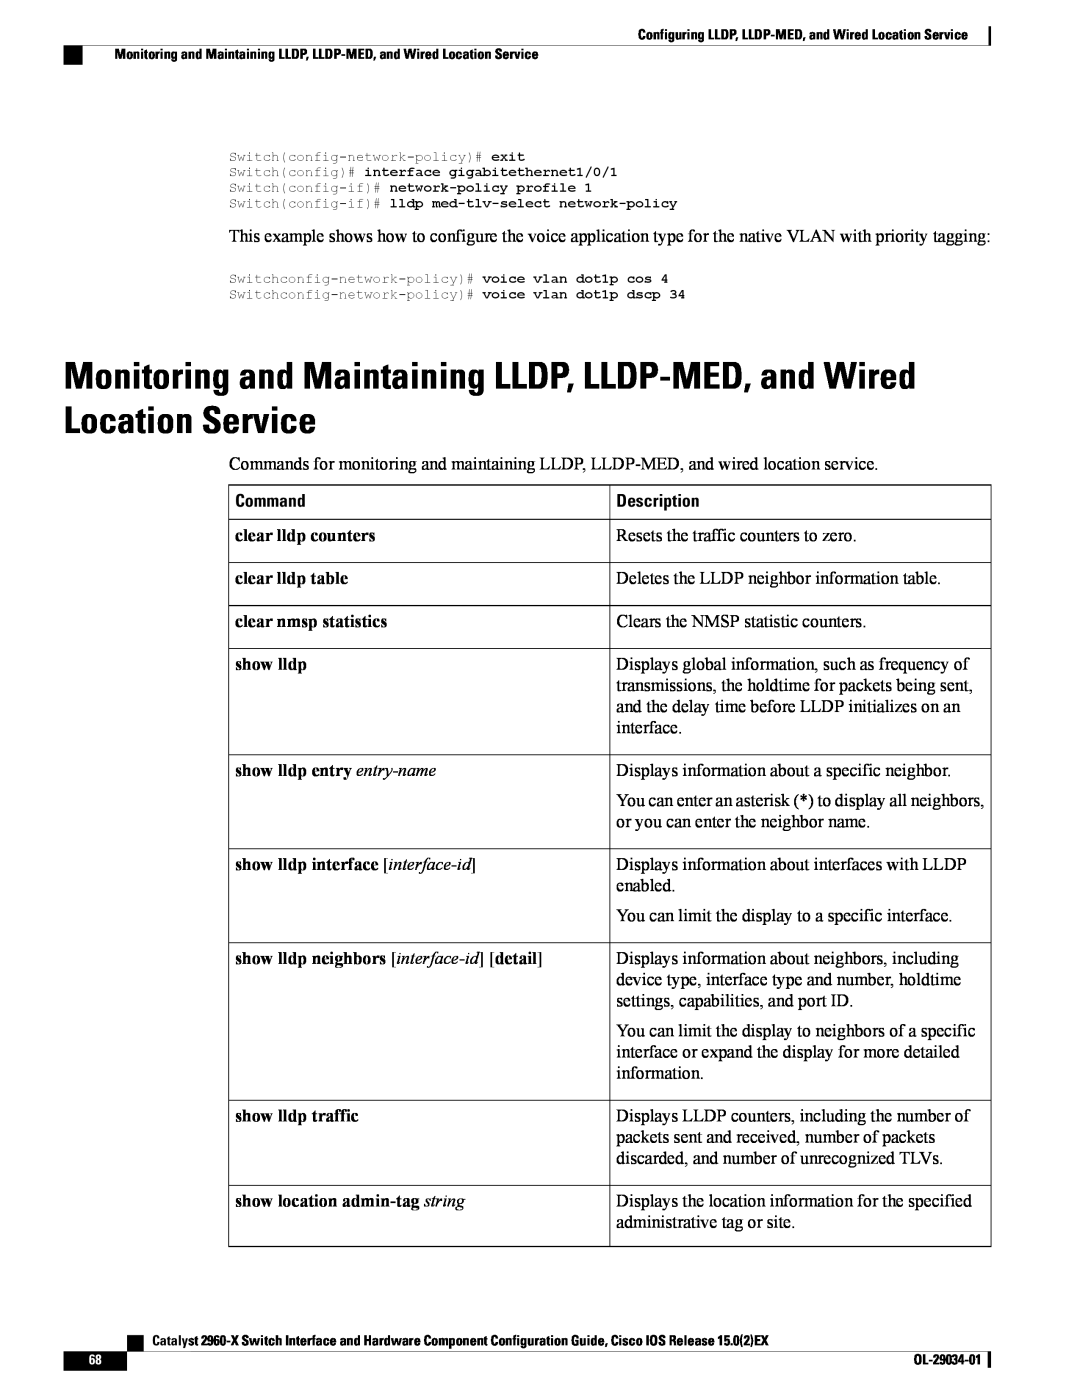 Cisco Systems WSC2960X48TDL Monitoring and Maintaining LLDP, LLDP-MED, and Wired Location Service, clear lldp counters 